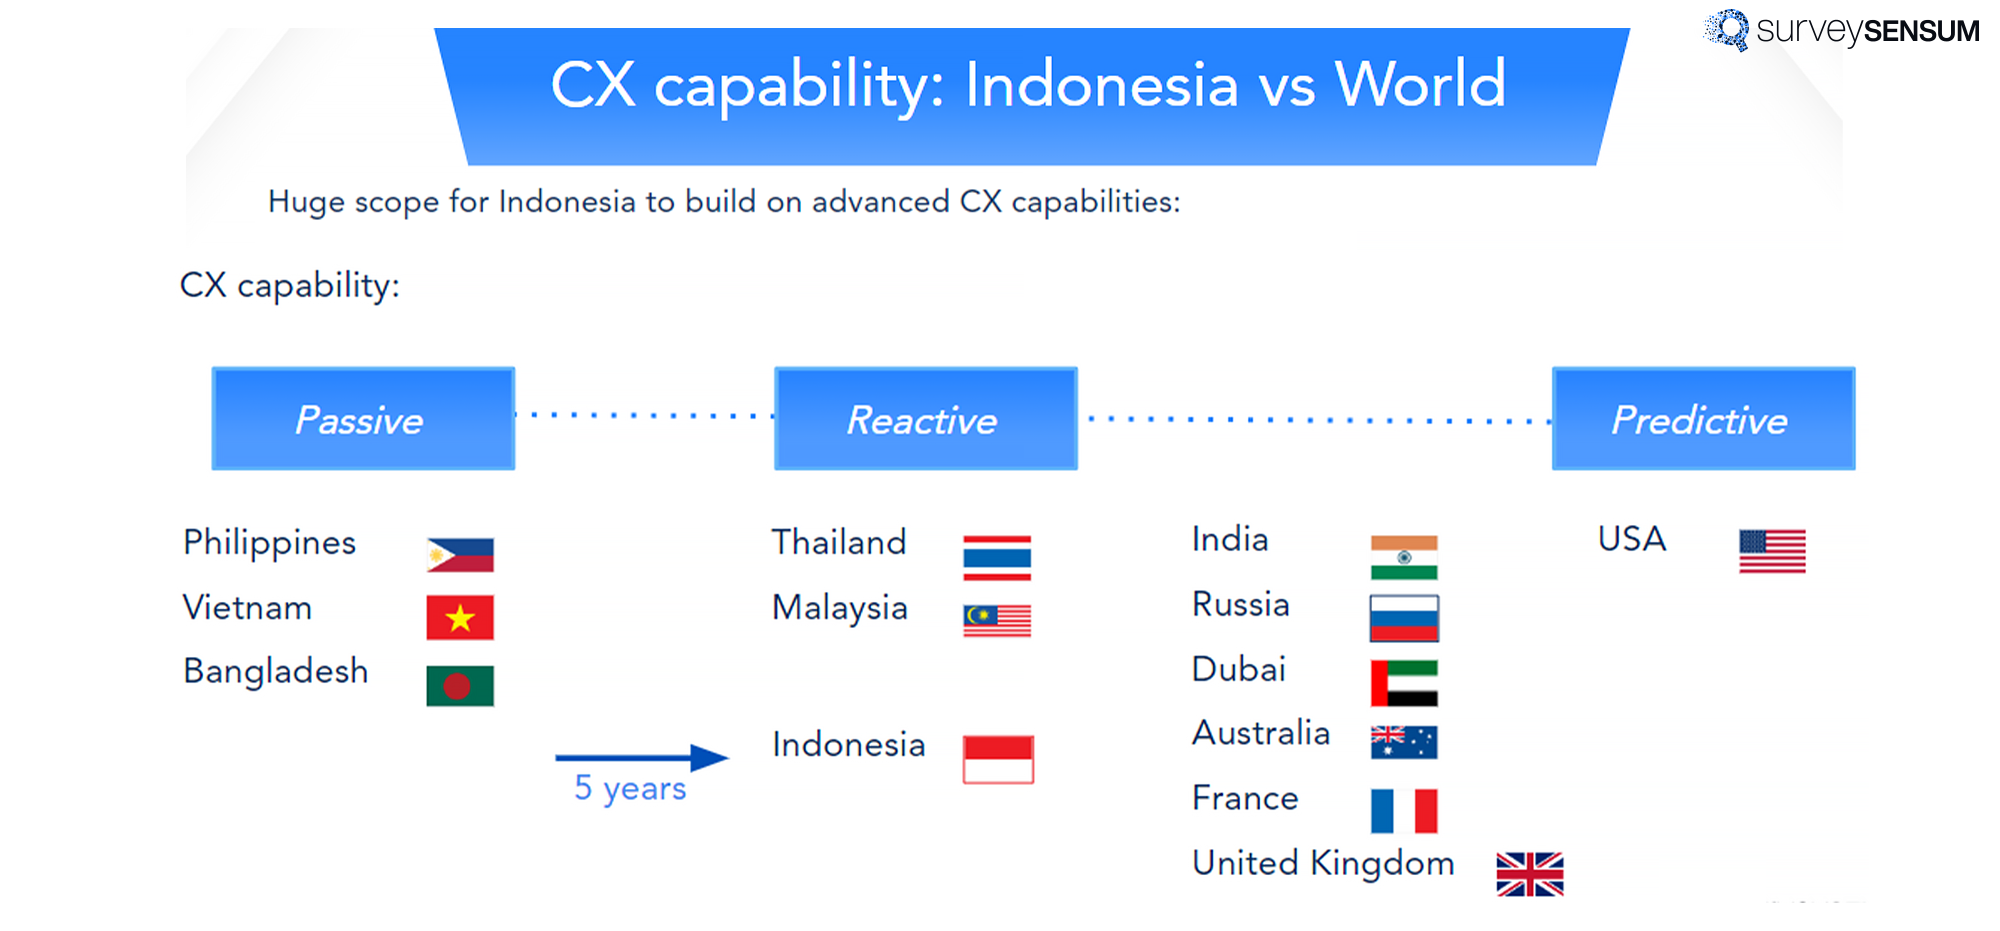 This image represents the CX Capability of Indonesia vs the World at which CX maturity stage each country is. 